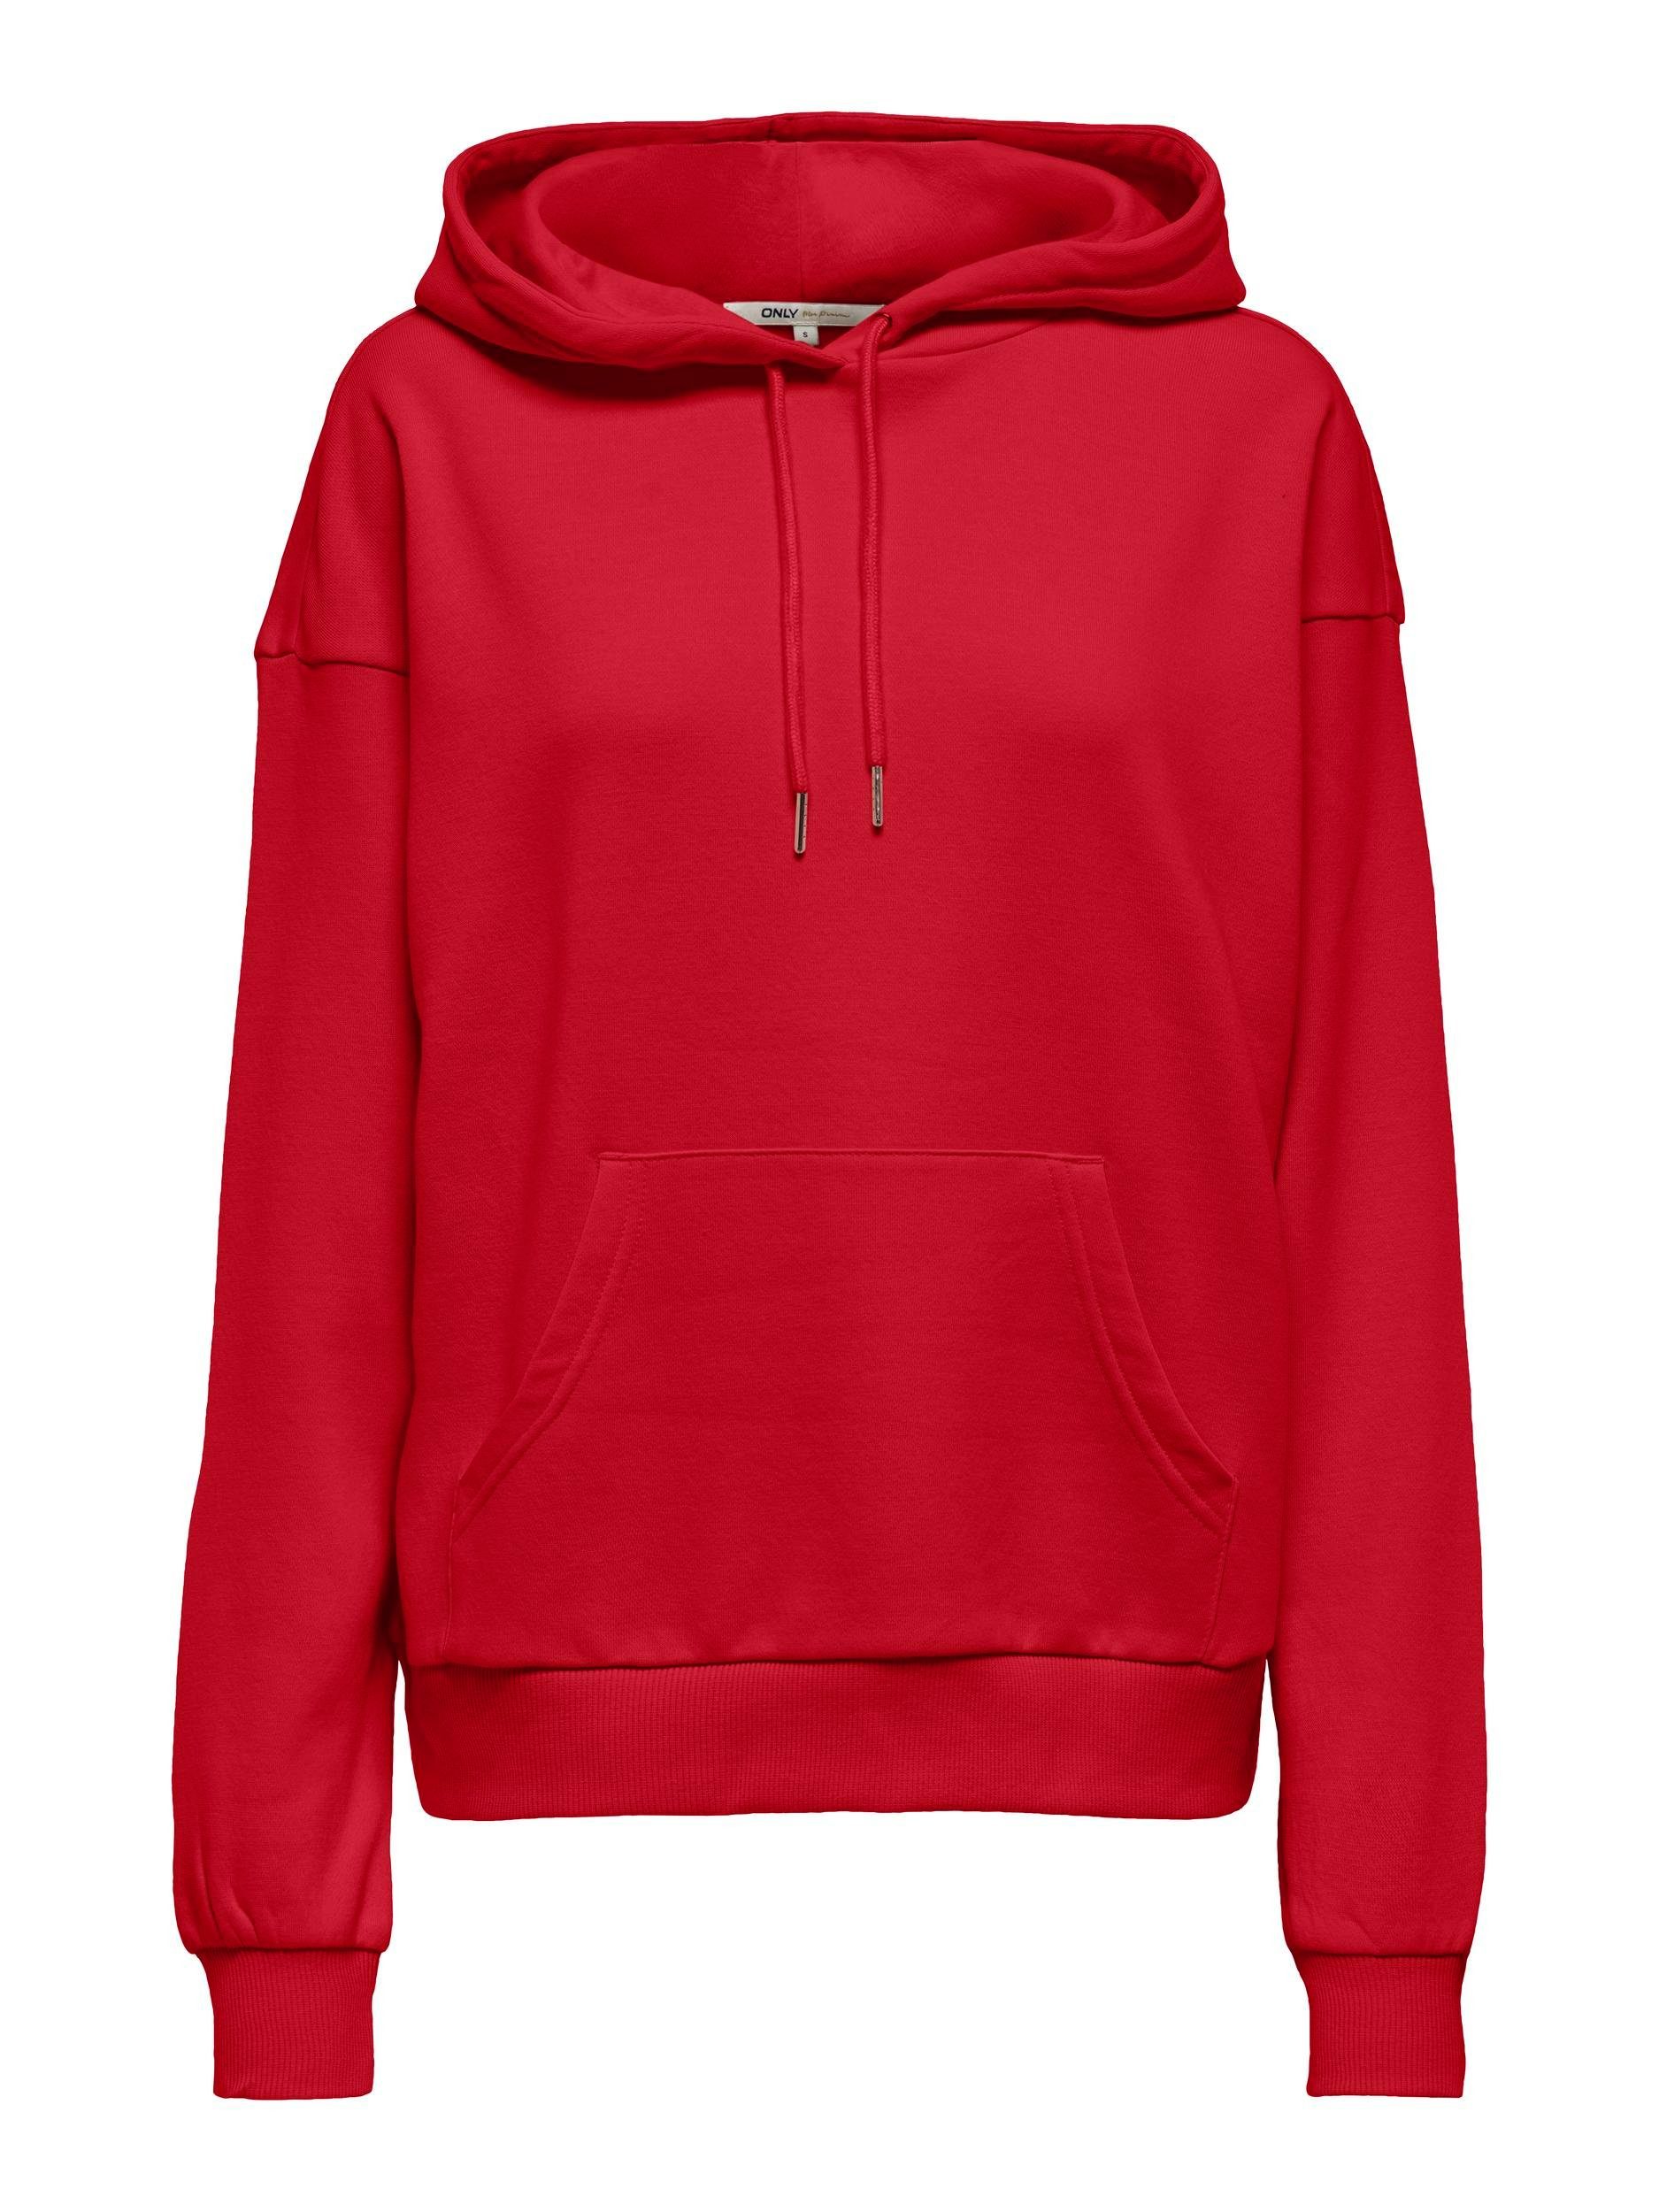 ONLY Hoodie ONLJODA SWEAT HOODIE Red Equestrian PNT EVERY